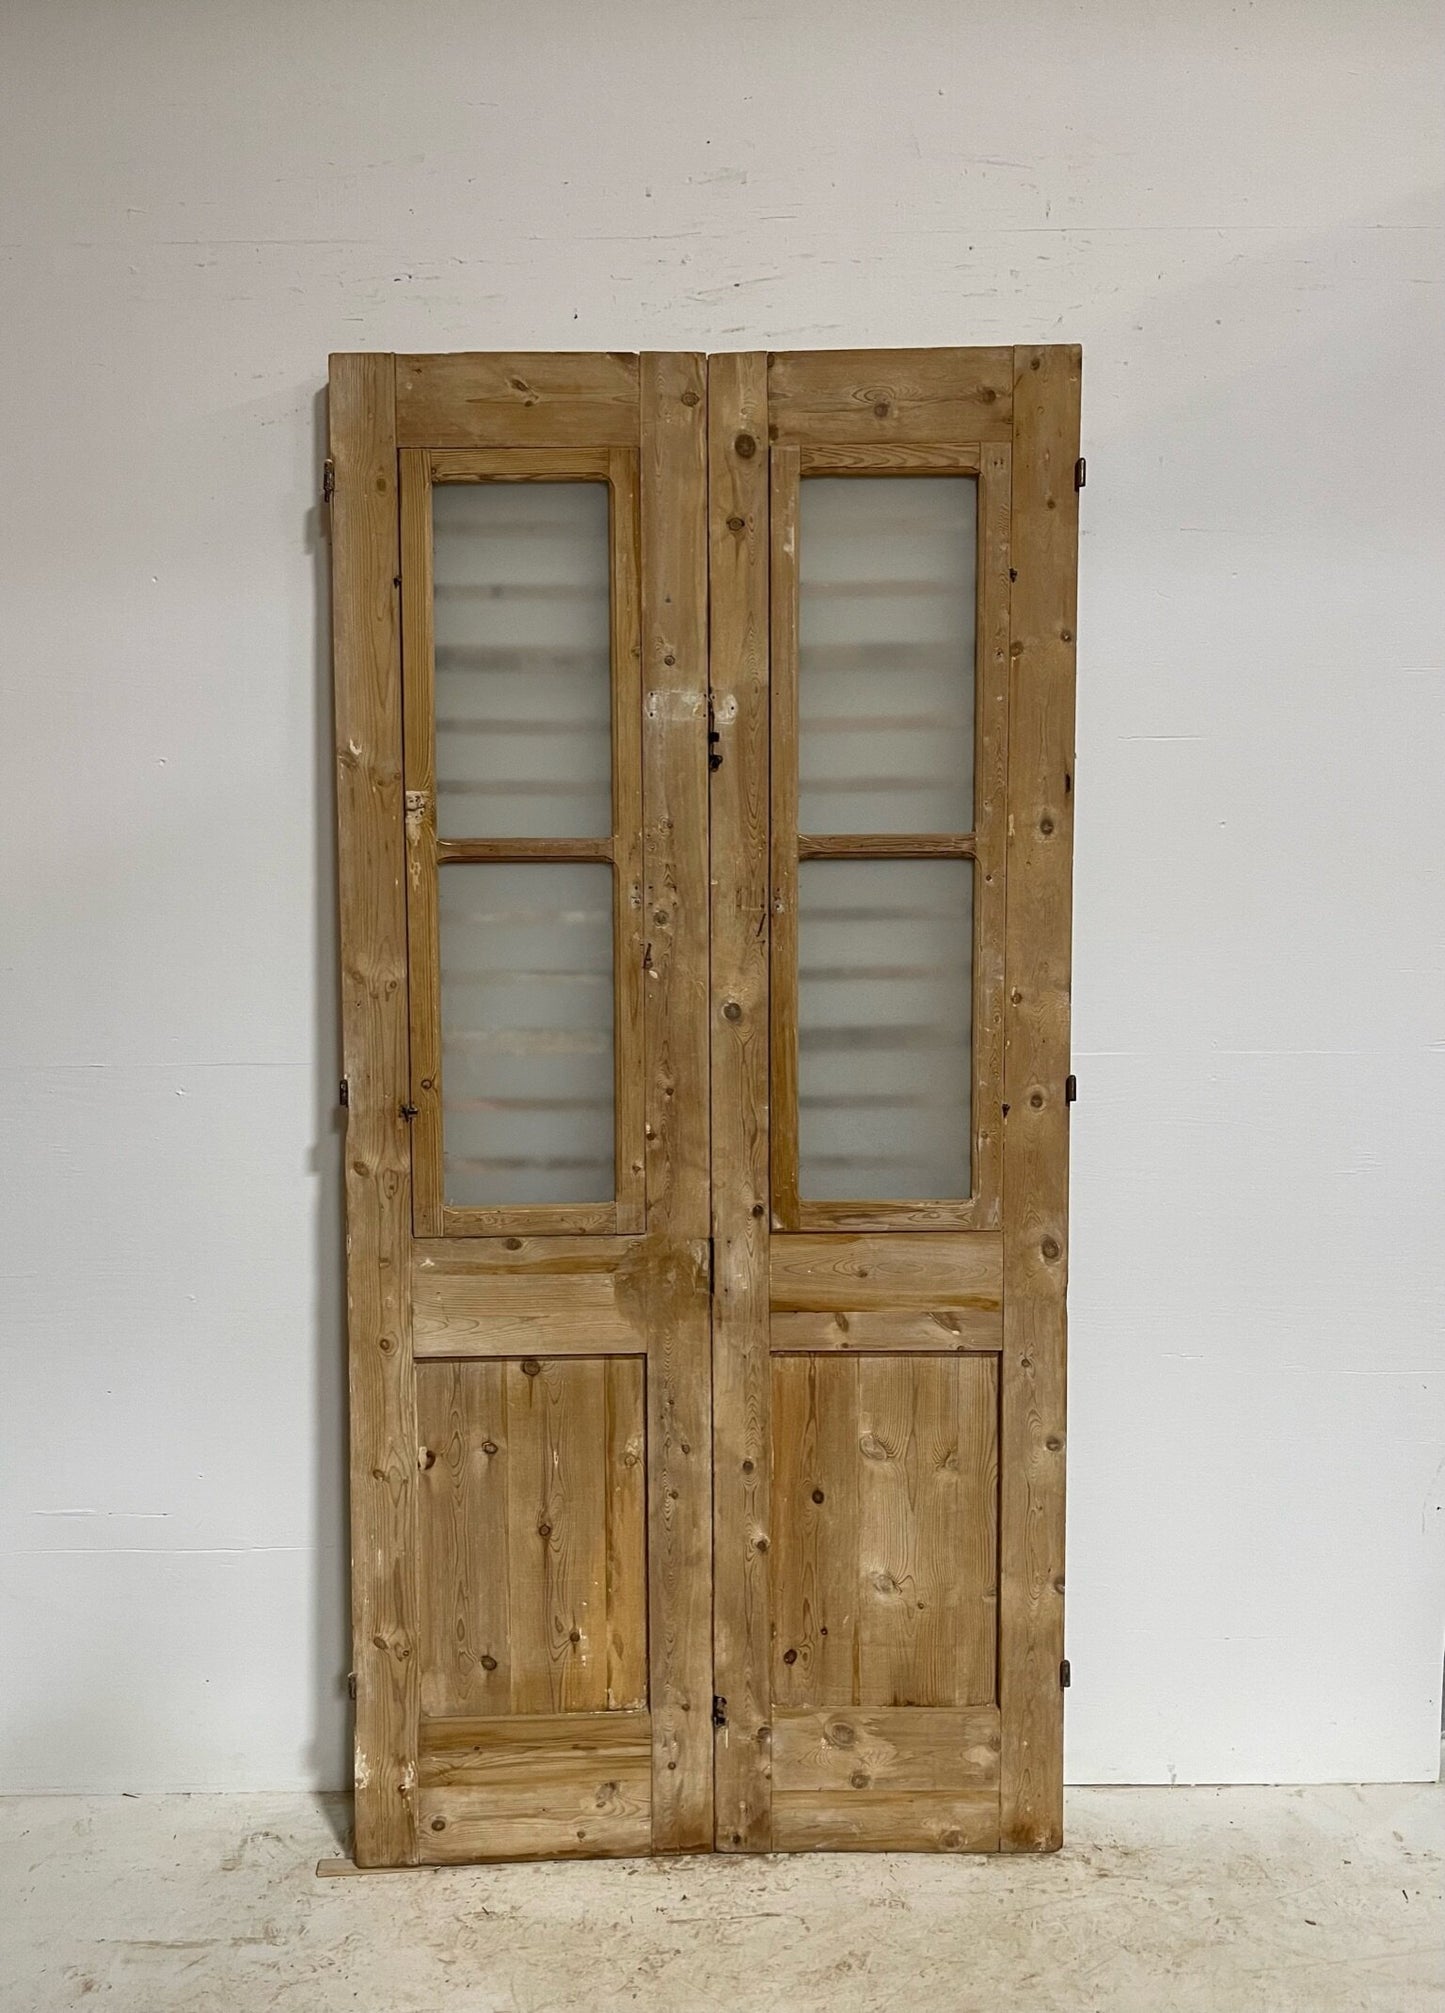 Antique French doors (88.75X43) with glass G1619